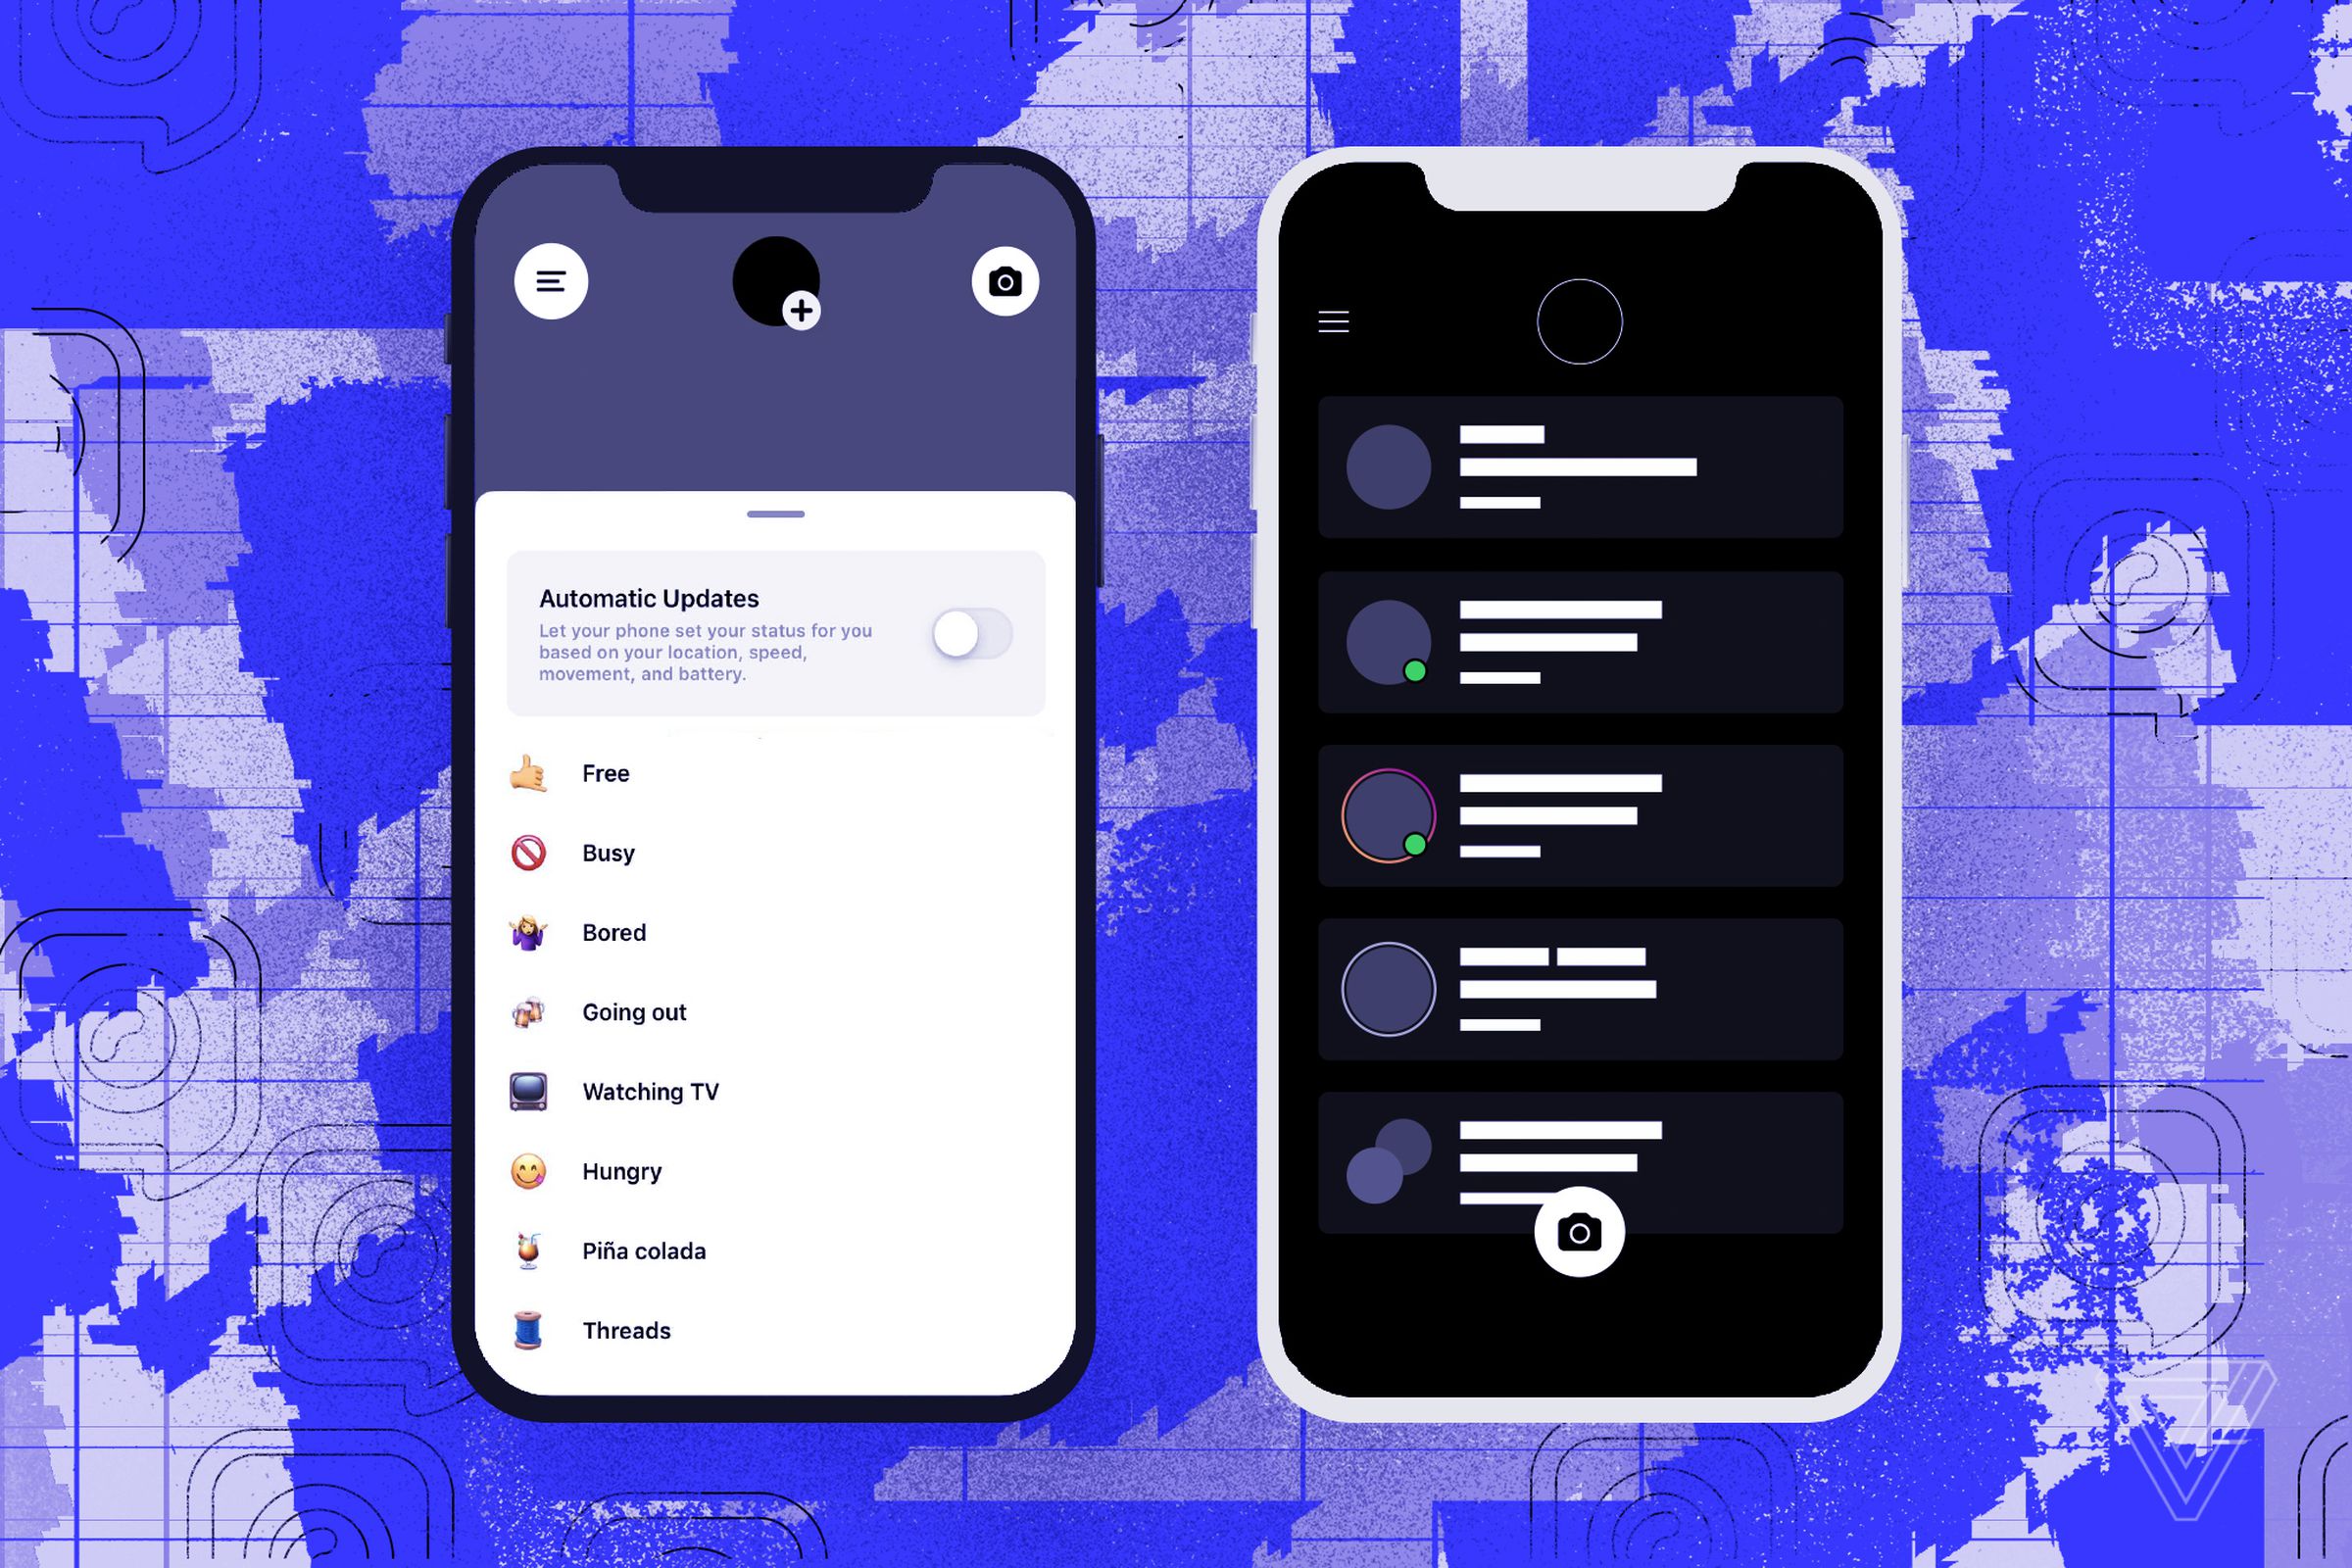 Illustrated screenshots from Threads, a new messaging app from Facebook and Instagram